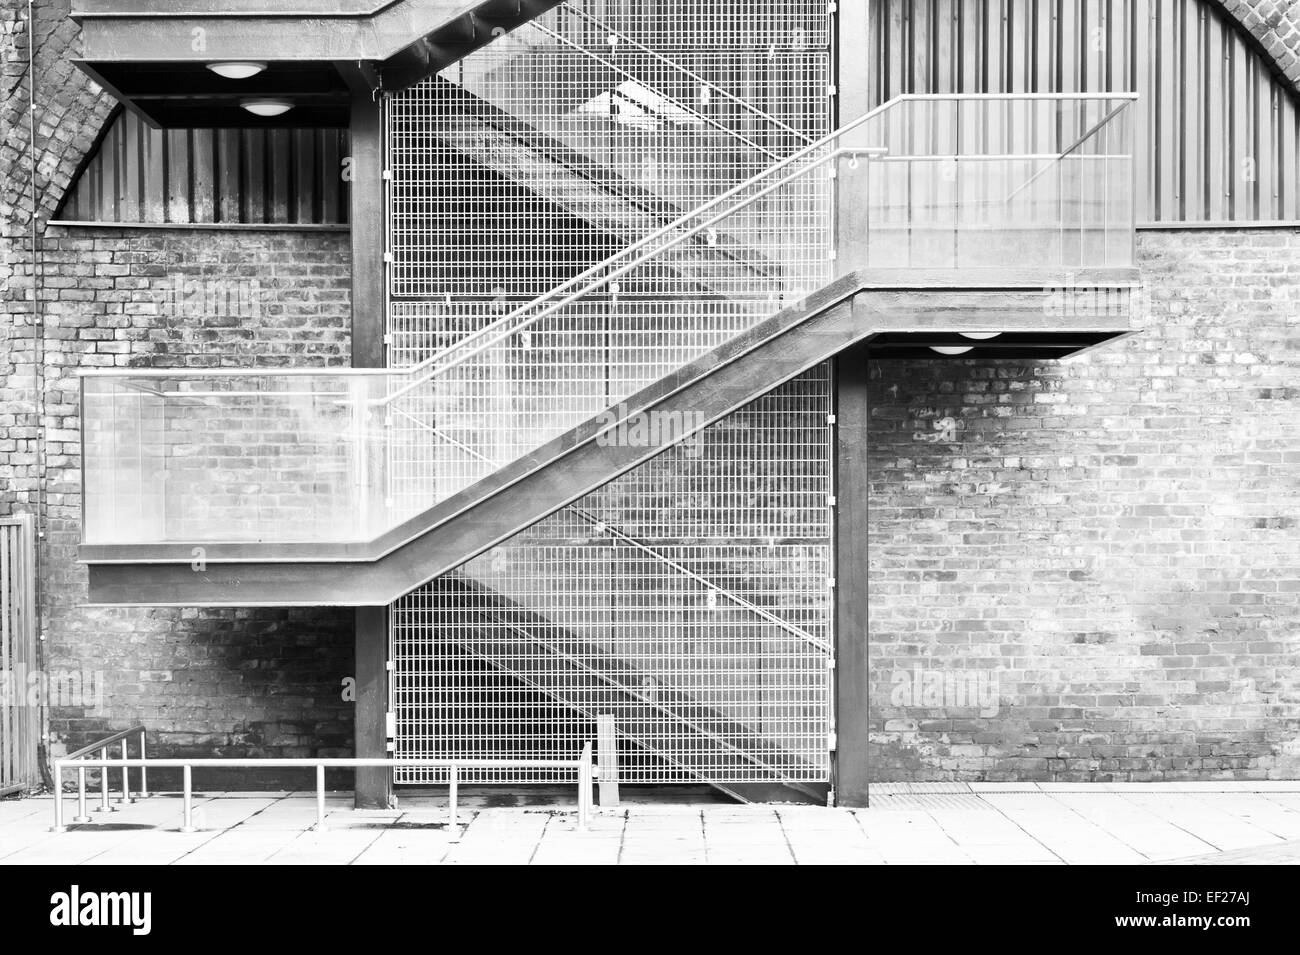 A staircase on the external wall of an urban building Stock Photo